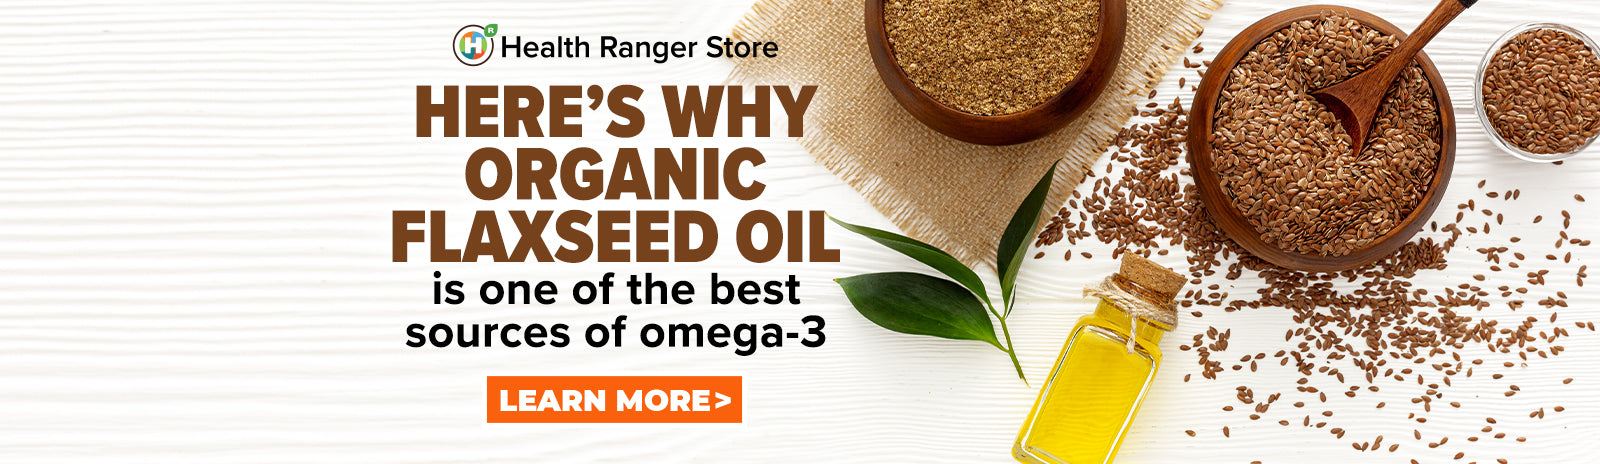 Organic flaxseed oil is one of the best sources of omega-3 fatty acids